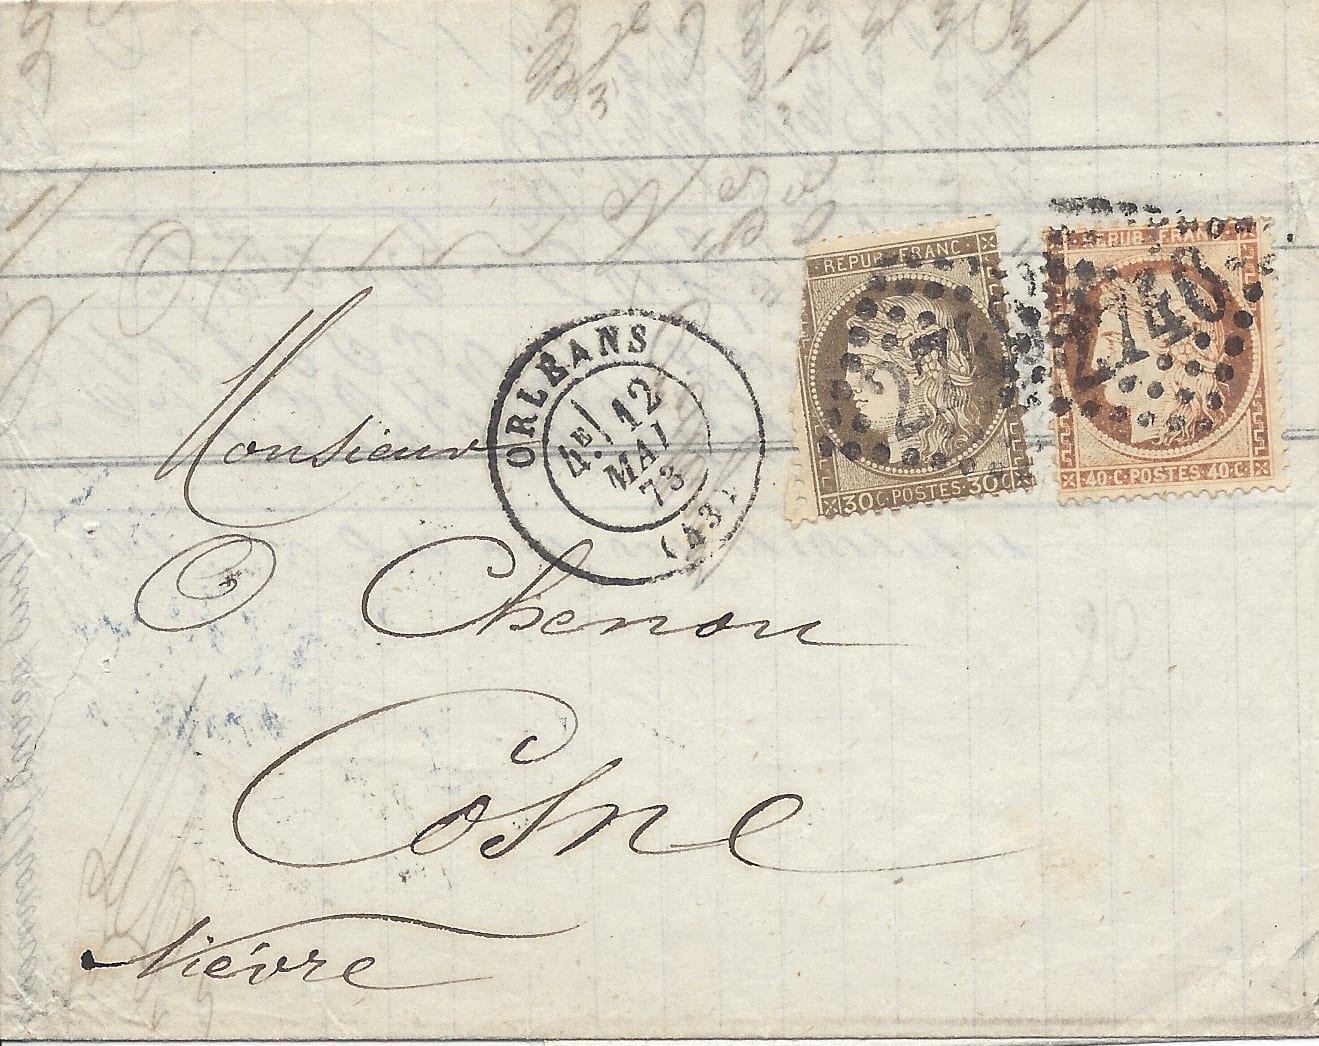 1873 third rate level letter